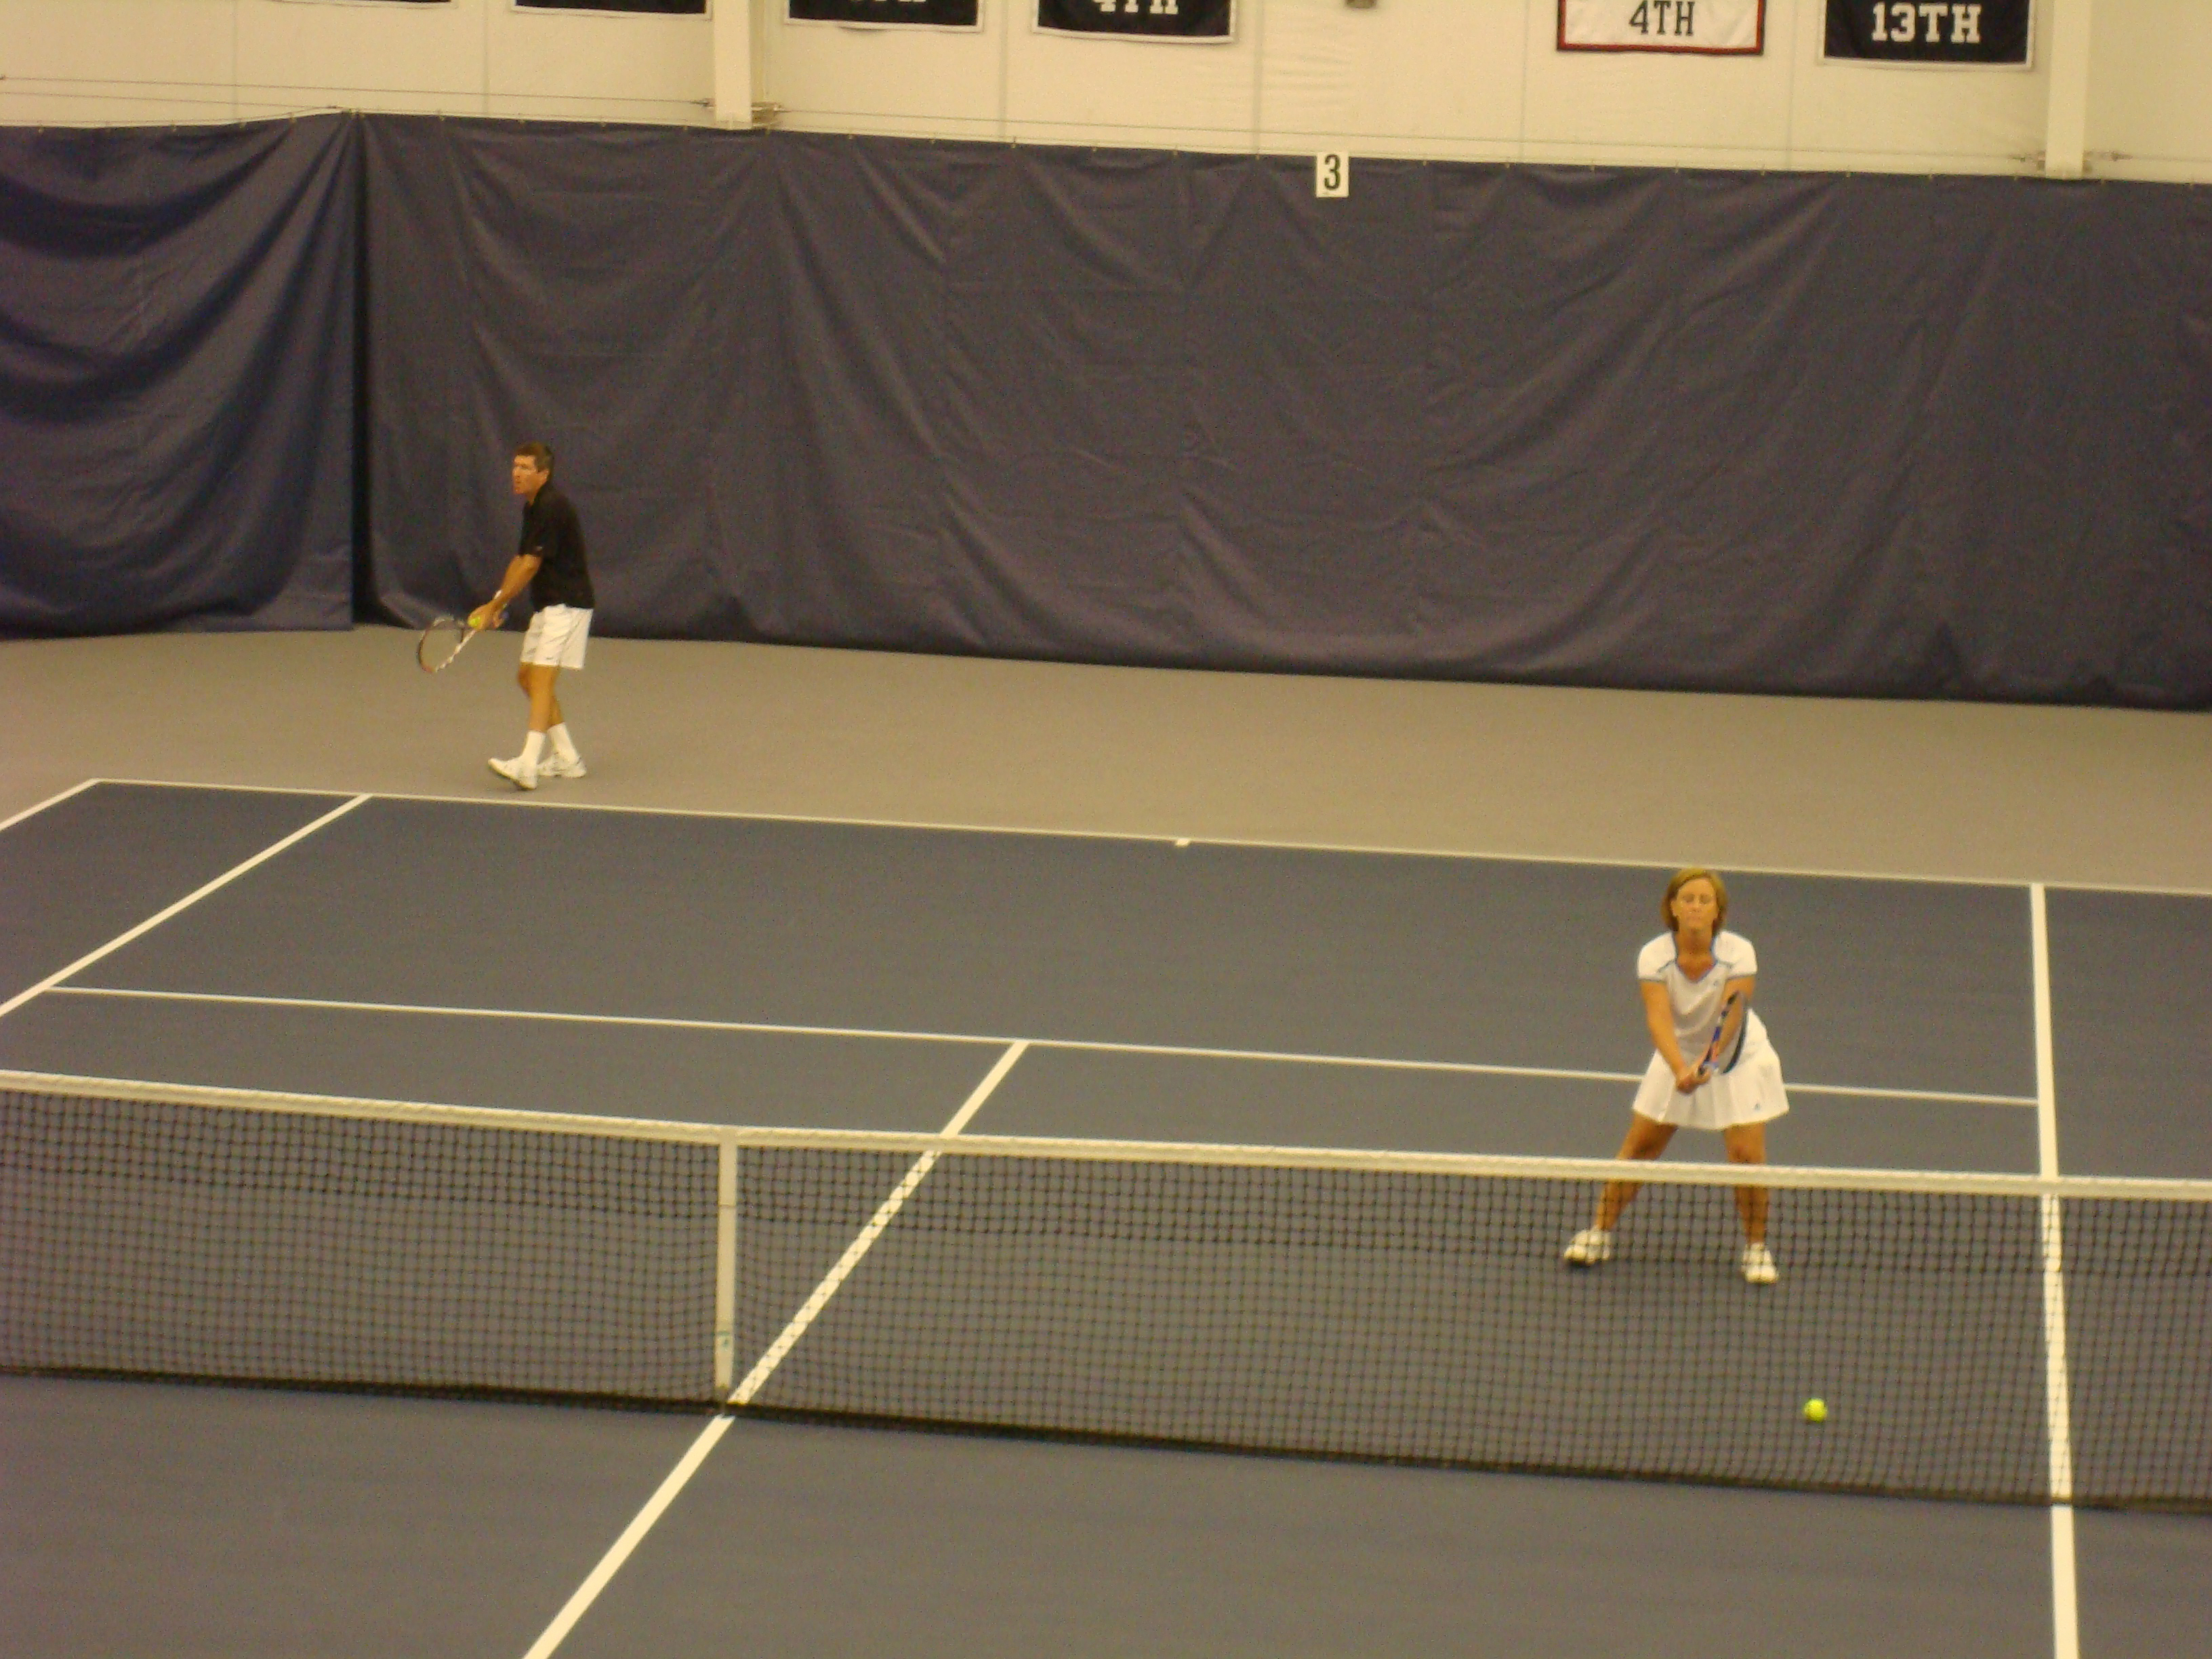 Mike Cline and Donna Cox playing Tennis on a court